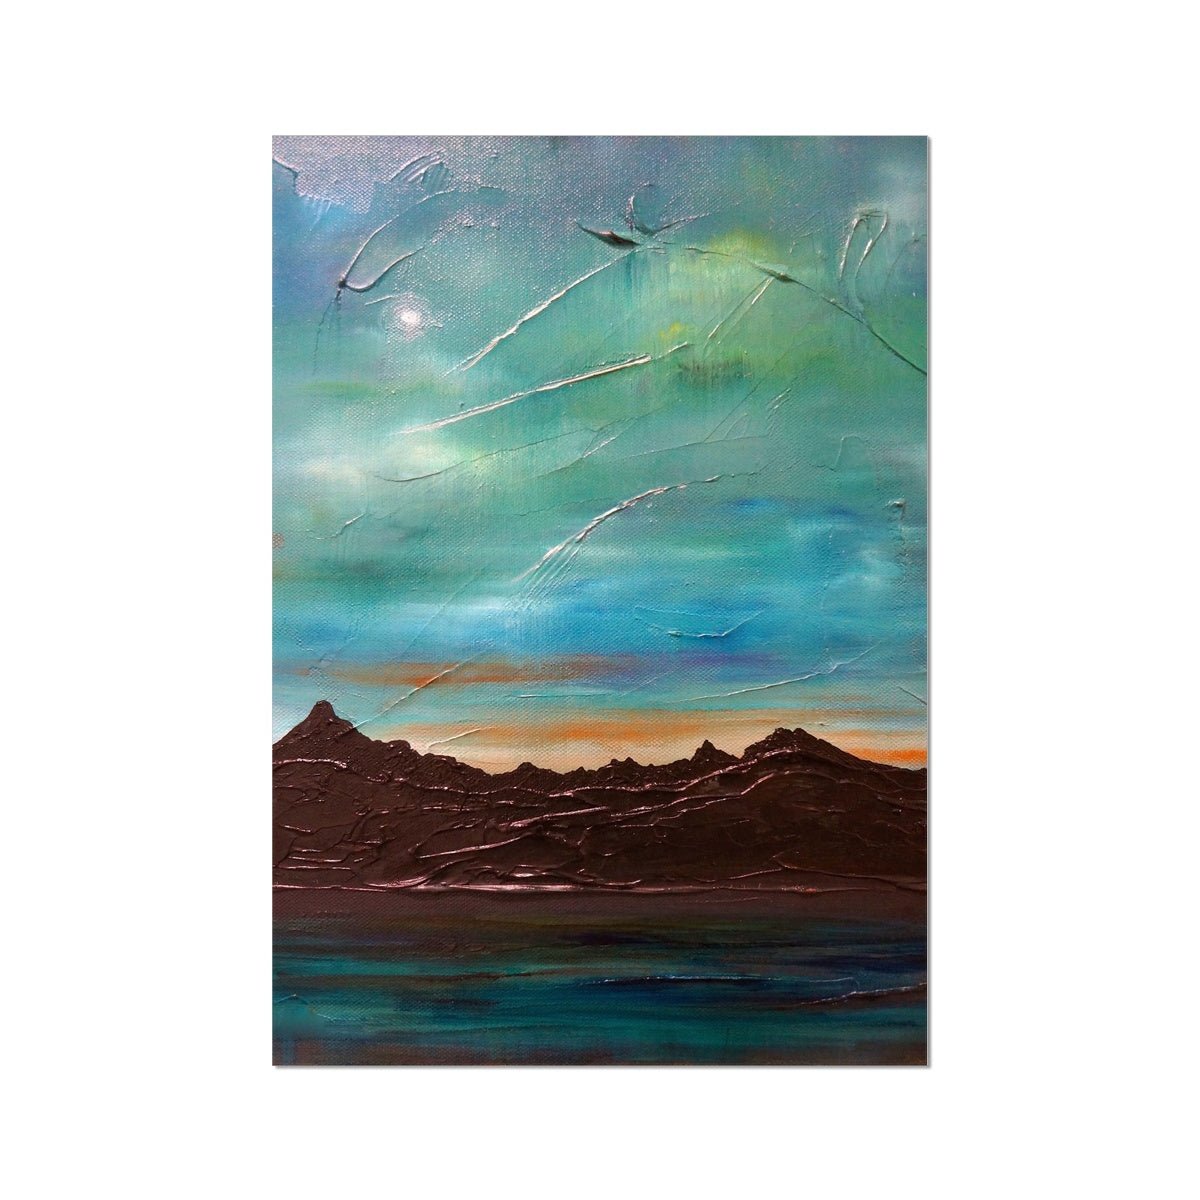 The Cuillin From Elgol Skye Painting | Fine Art Prints From Scotland-Unframed Prints-Skye Art Gallery-A2 Portrait-Paintings, Prints, Homeware, Art Gifts From Scotland By Scottish Artist Kevin Hunter